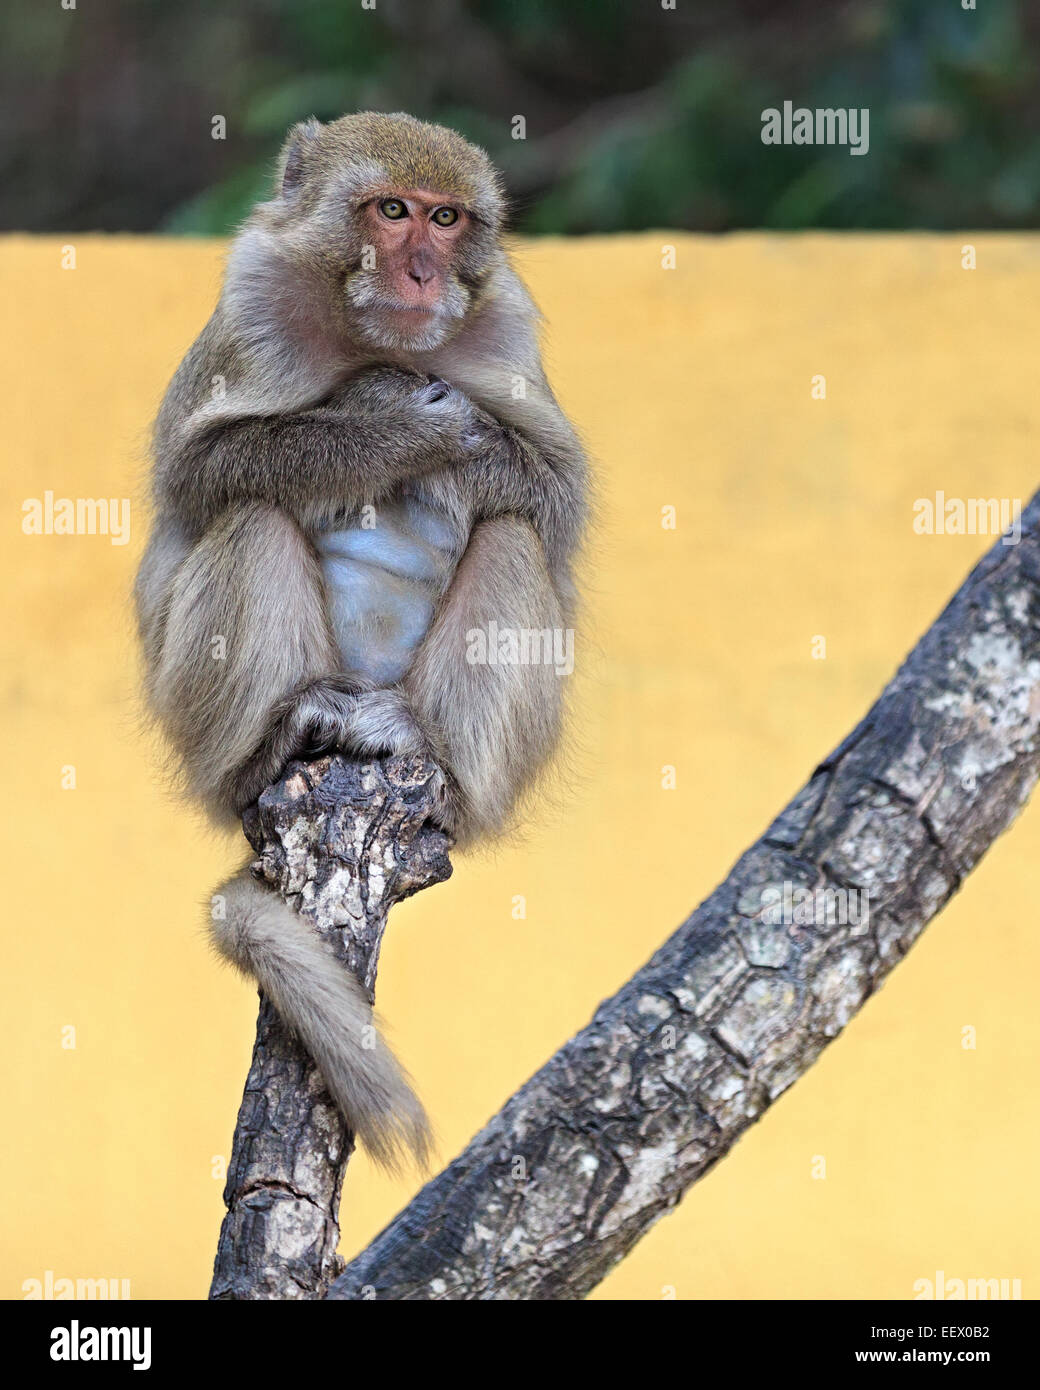 Monkey portrait sitting on a branch on a vivid yellow background Stock Photo